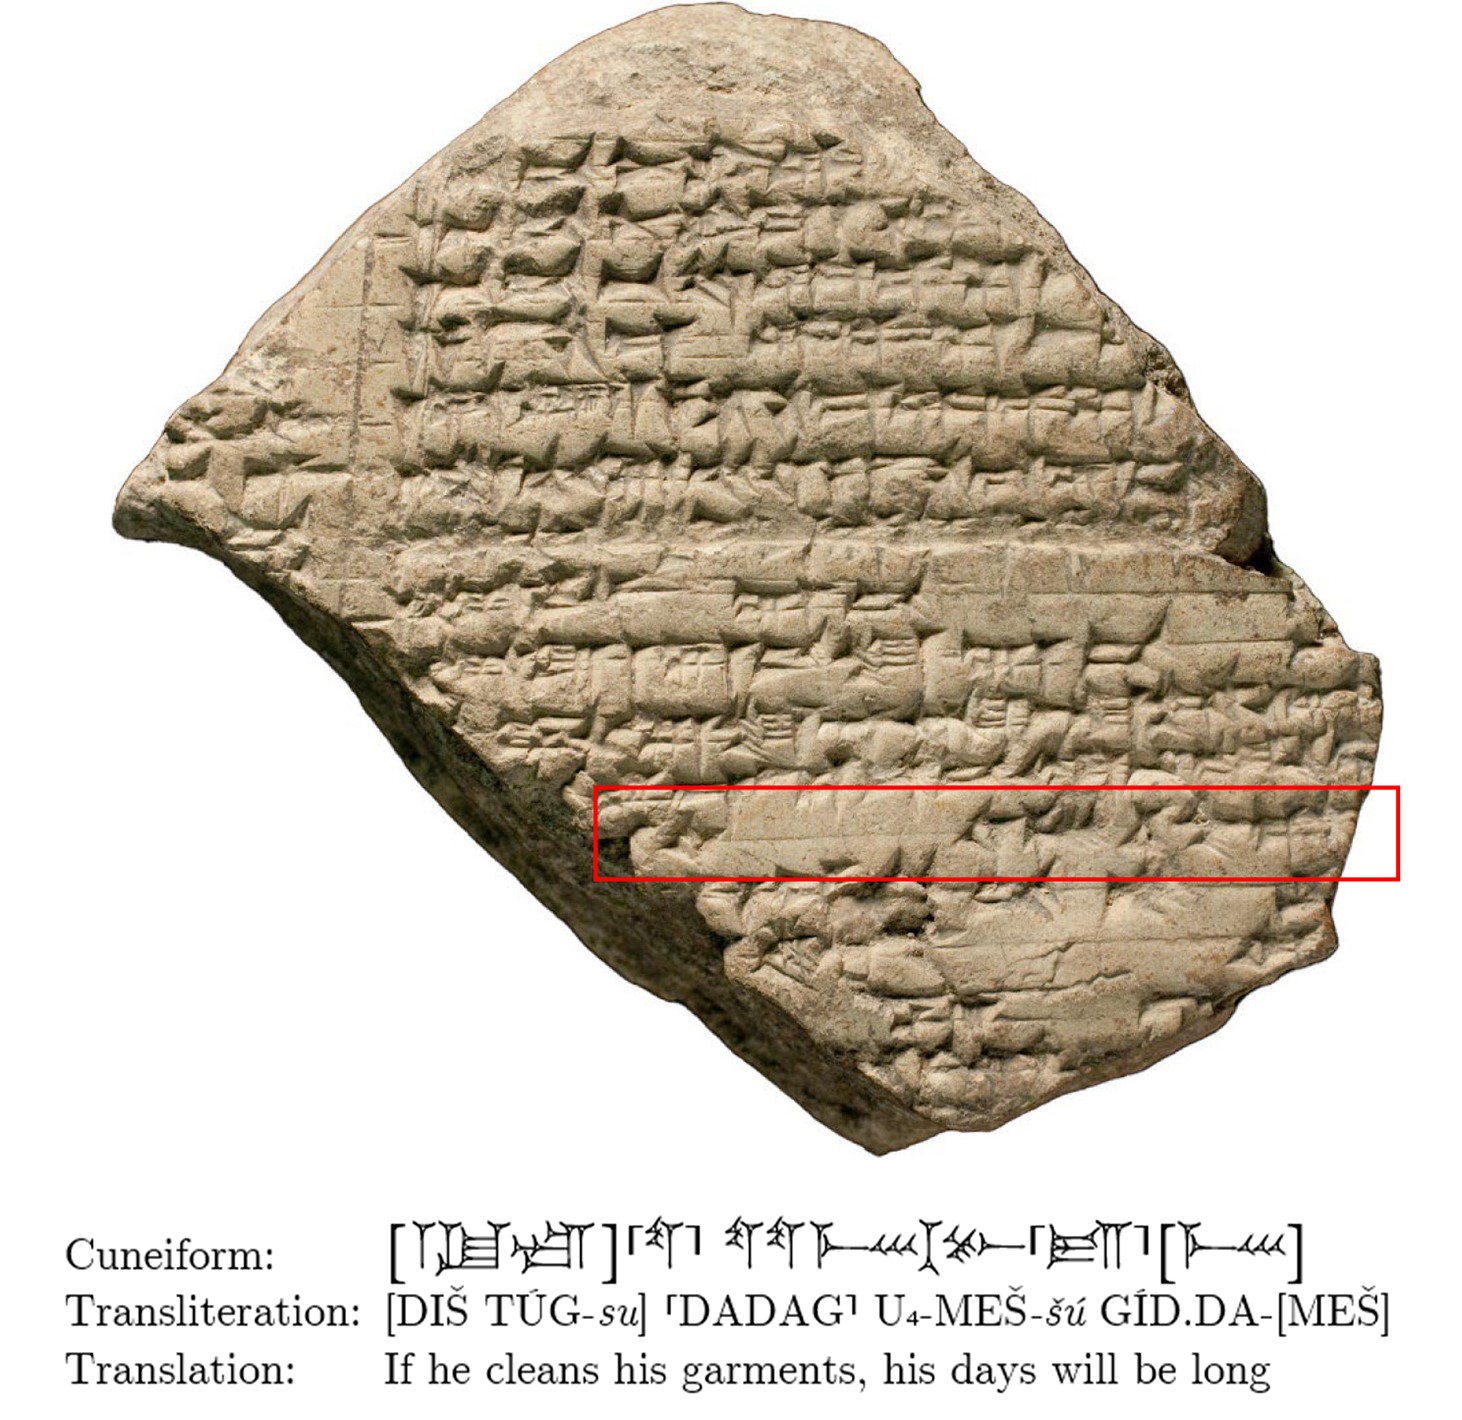 researchers-in-israel-are-using-a-i-to-translate-fragments-of-ancient-cuneiform-text-into-english-or-artnet-news